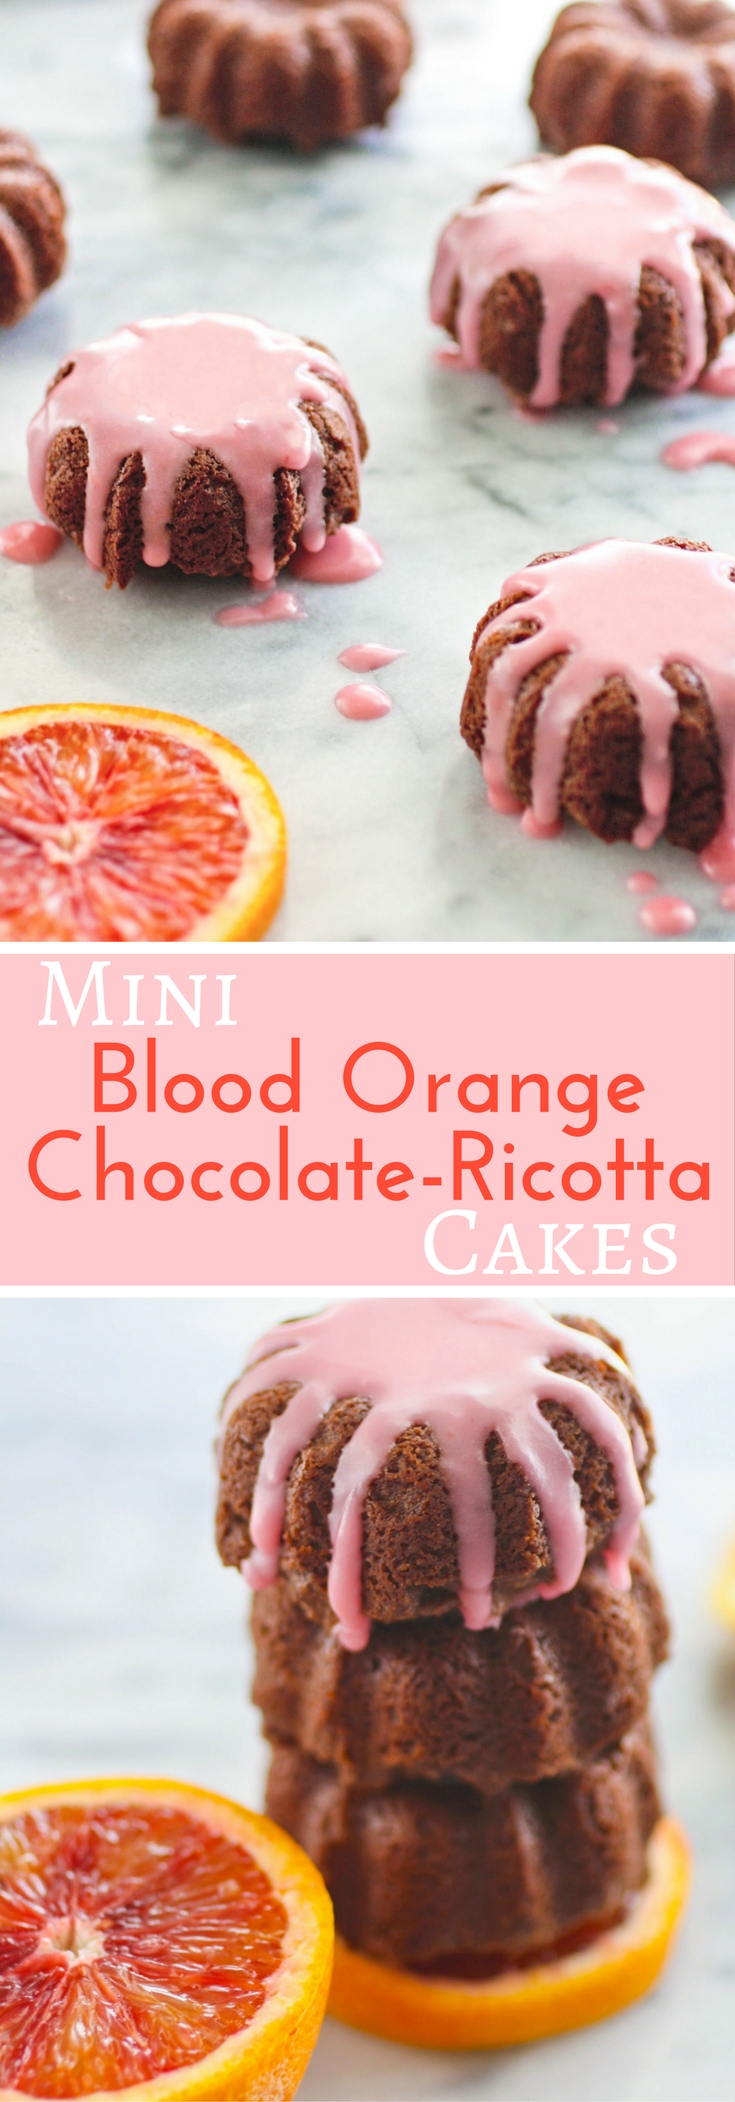 Mini Blood Orange Scented Chocolate-Ricotta Cakes are a lovely treat for dessert! These mini cakes are fun with great blood orange flavors!